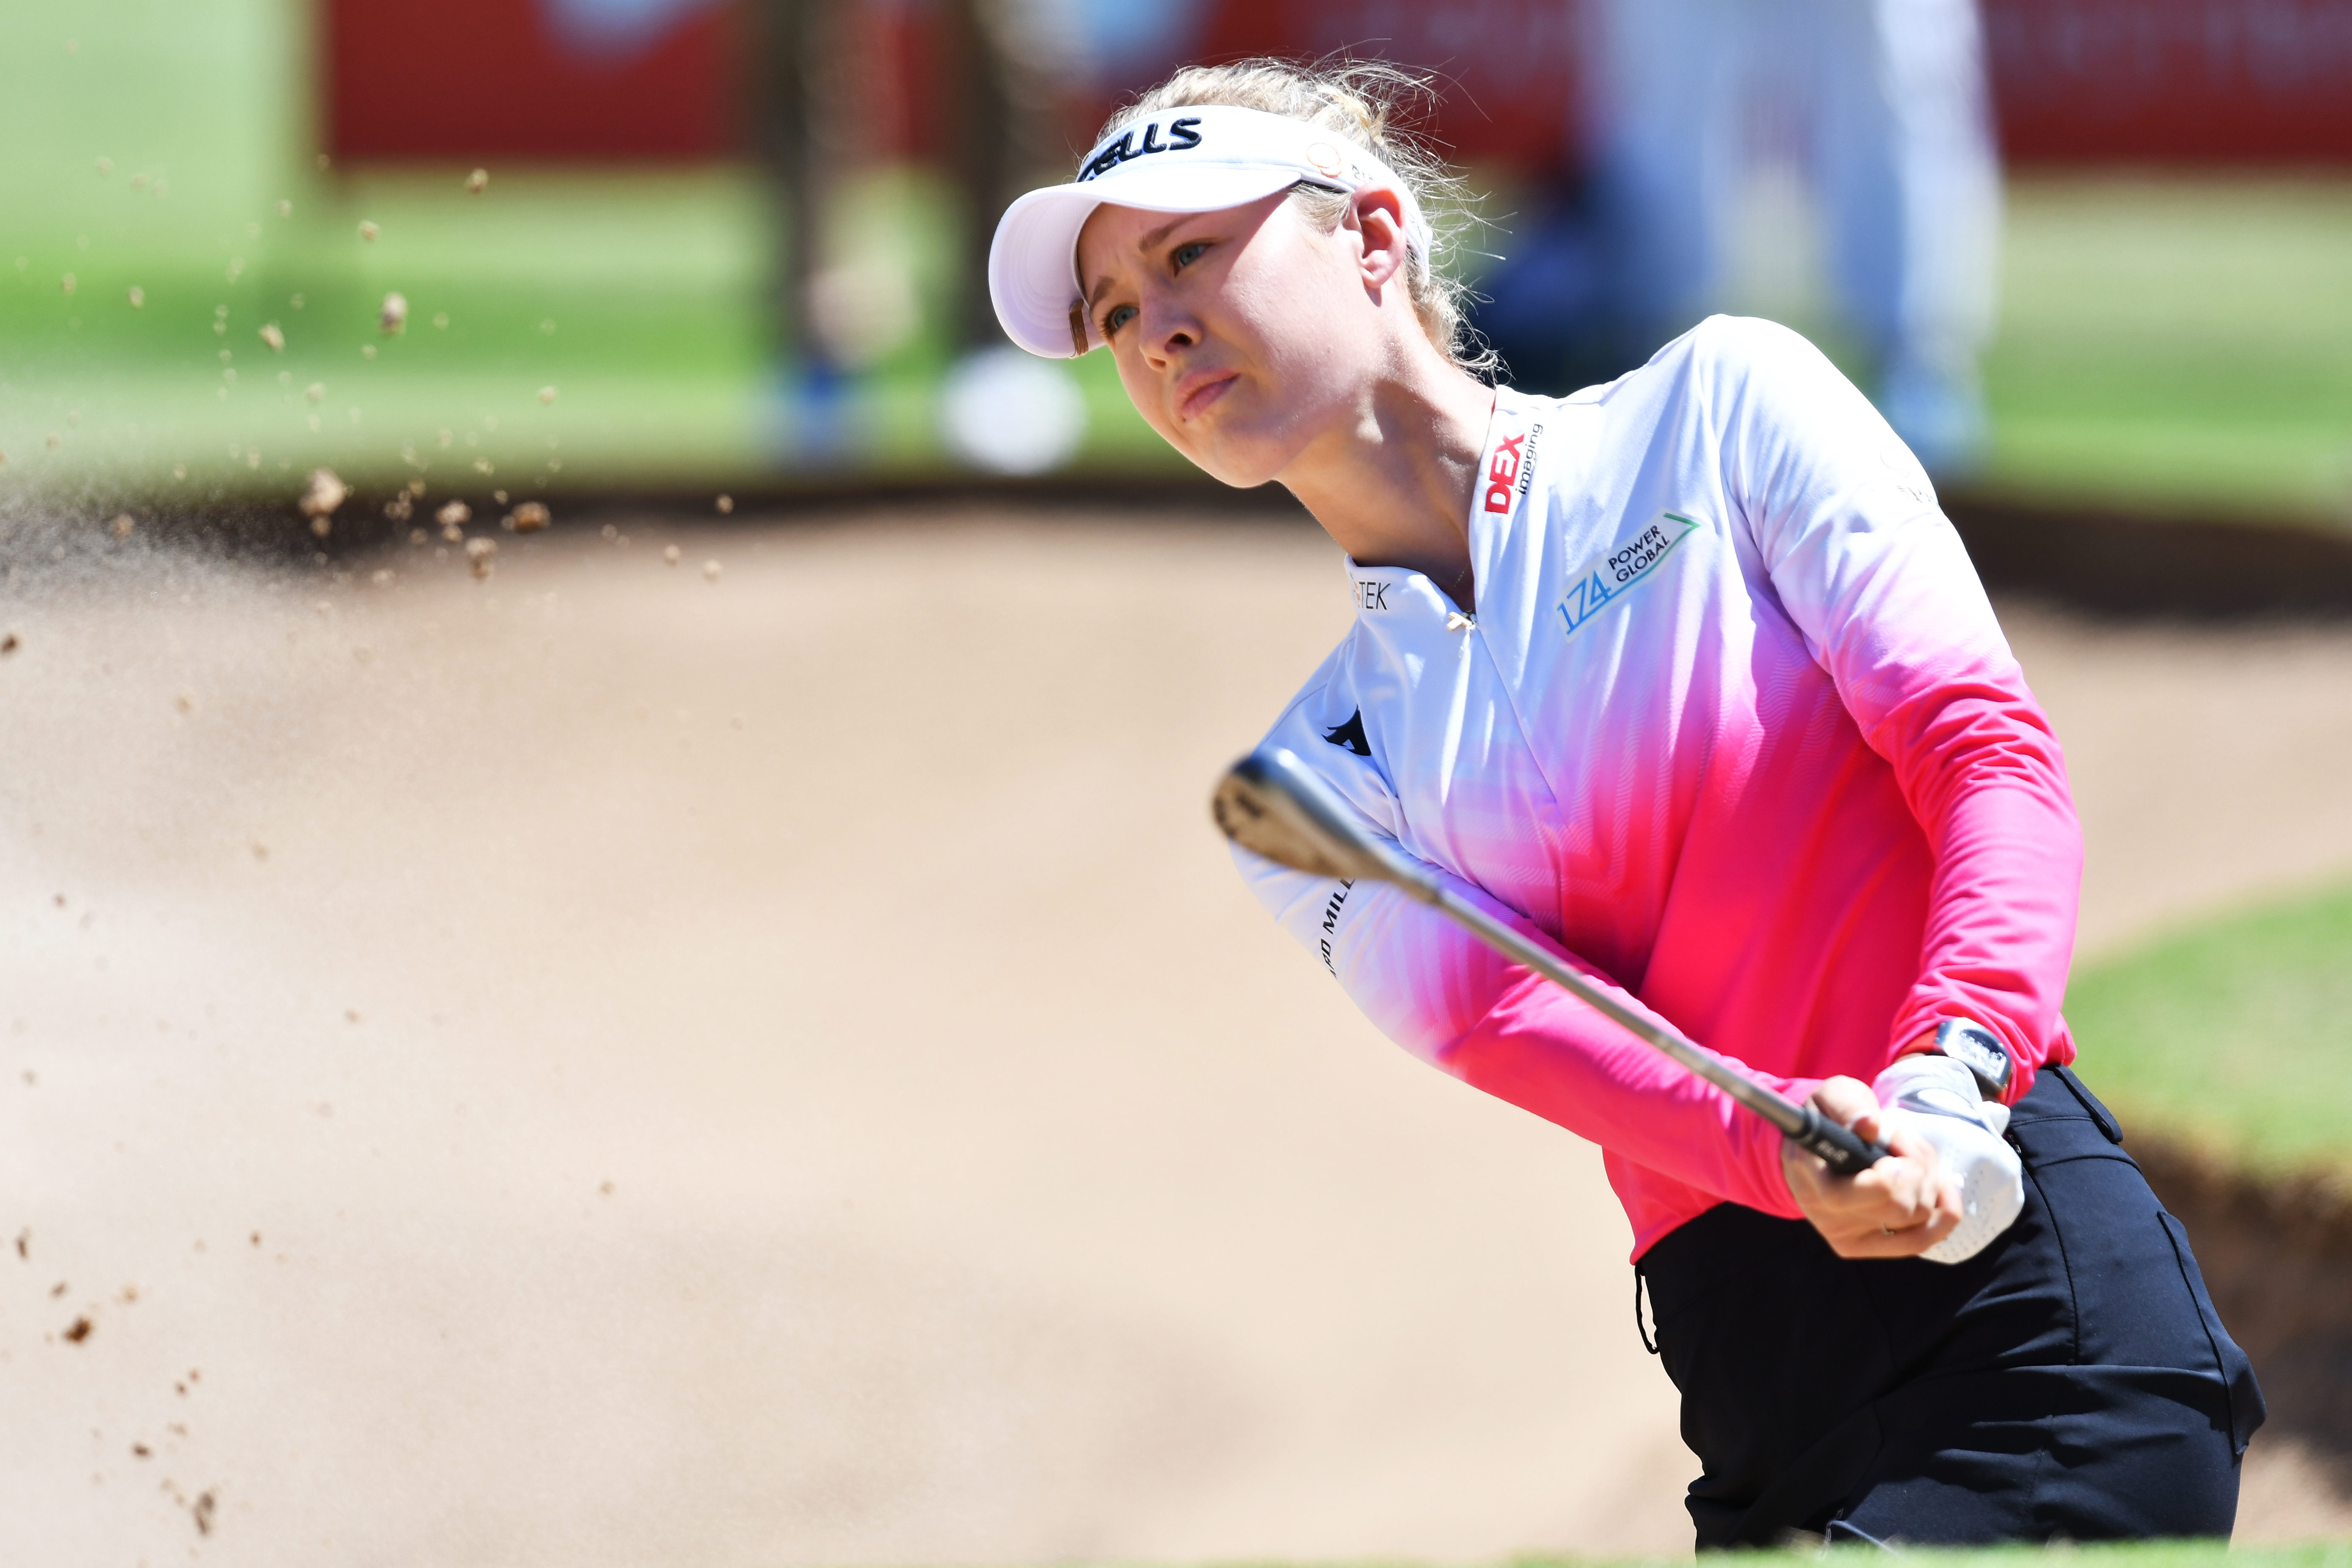 stramt satellit heks The clubs Nelly Korda used to win the ISPS Handa Women's Australian Open |  Golf Equipment: Clubs, Balls, Bags | Golf Digest